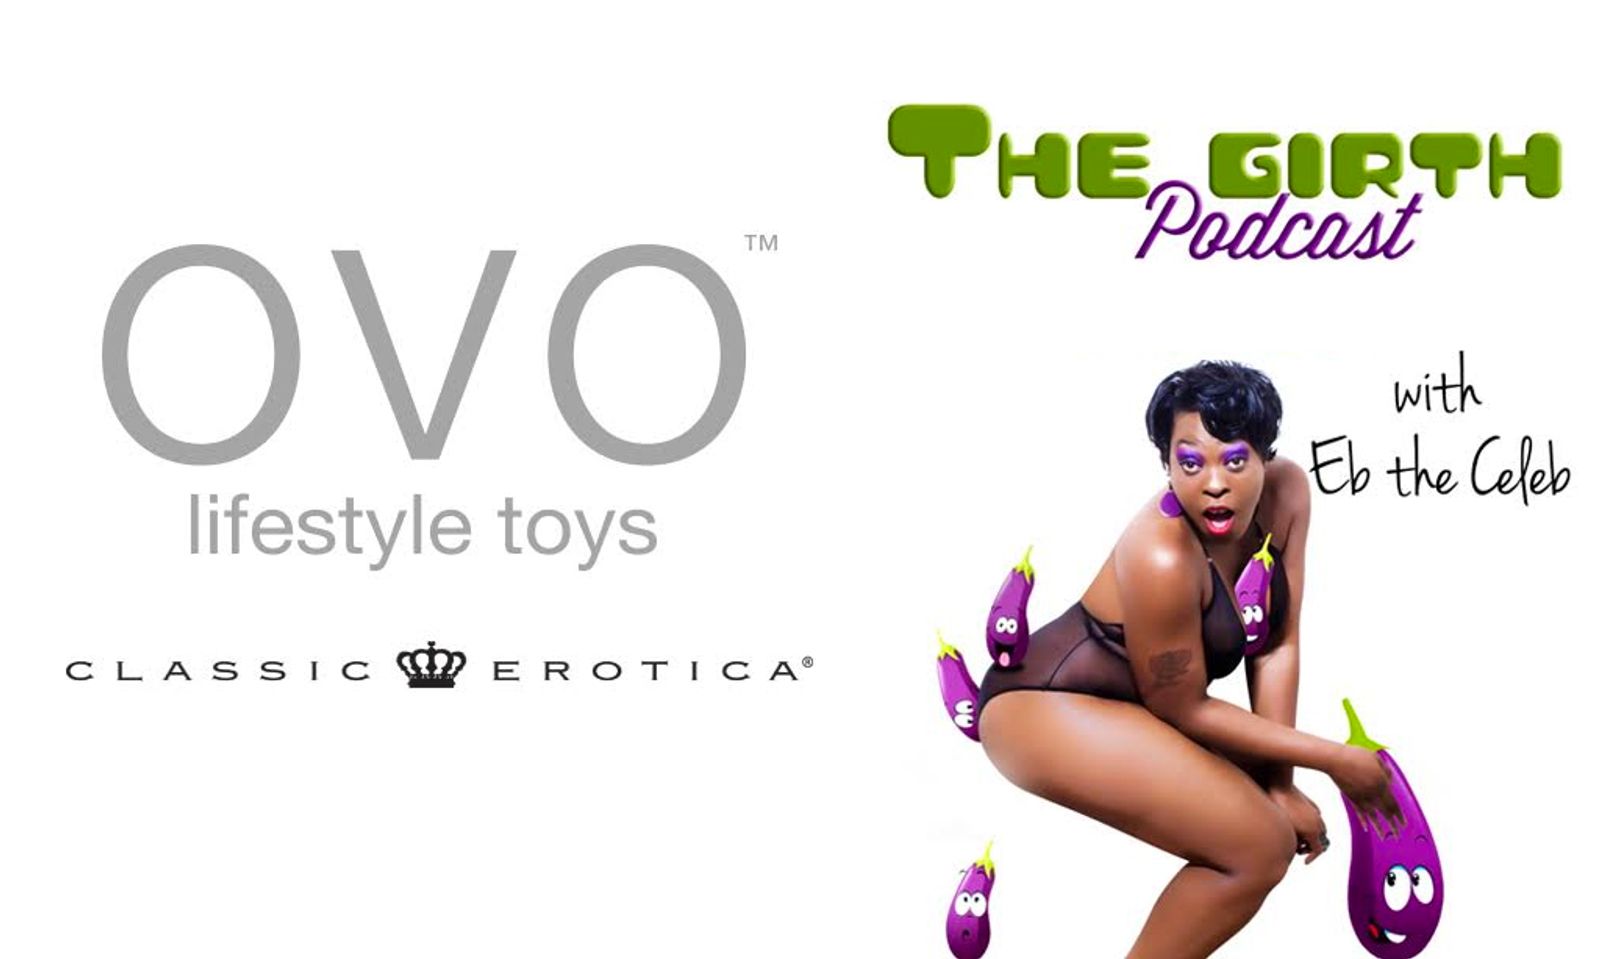 Reps From Ovo, Classic Erotica Speak on ‘Girth Podcast'